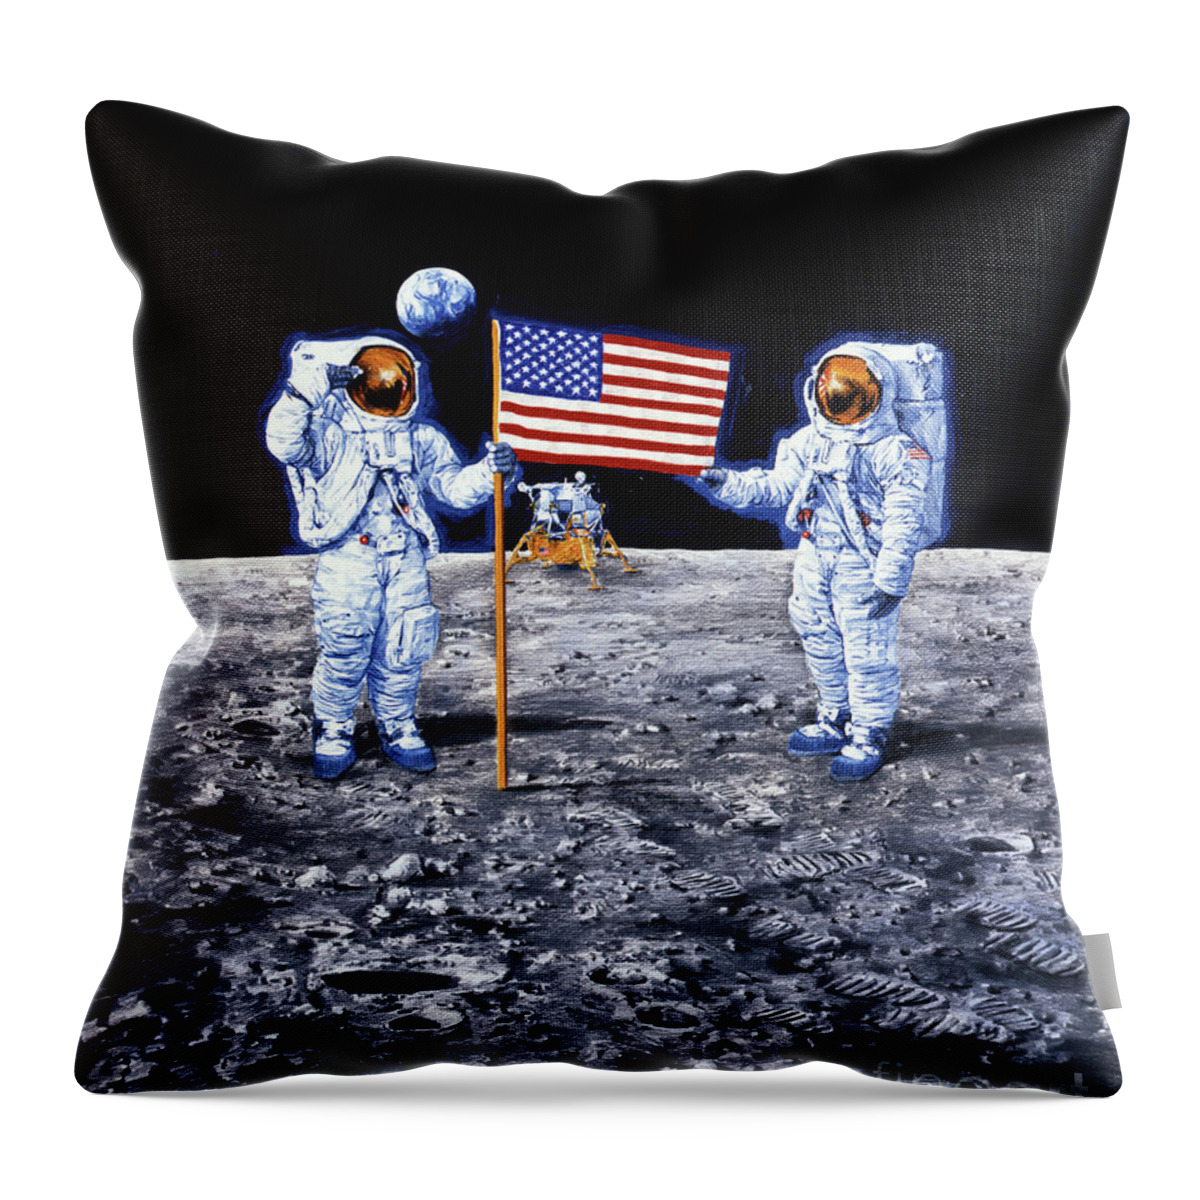 Paul And Chris Calle Throw Pillow featuring the painting First Men On The Moon by Paul and Chris Calle